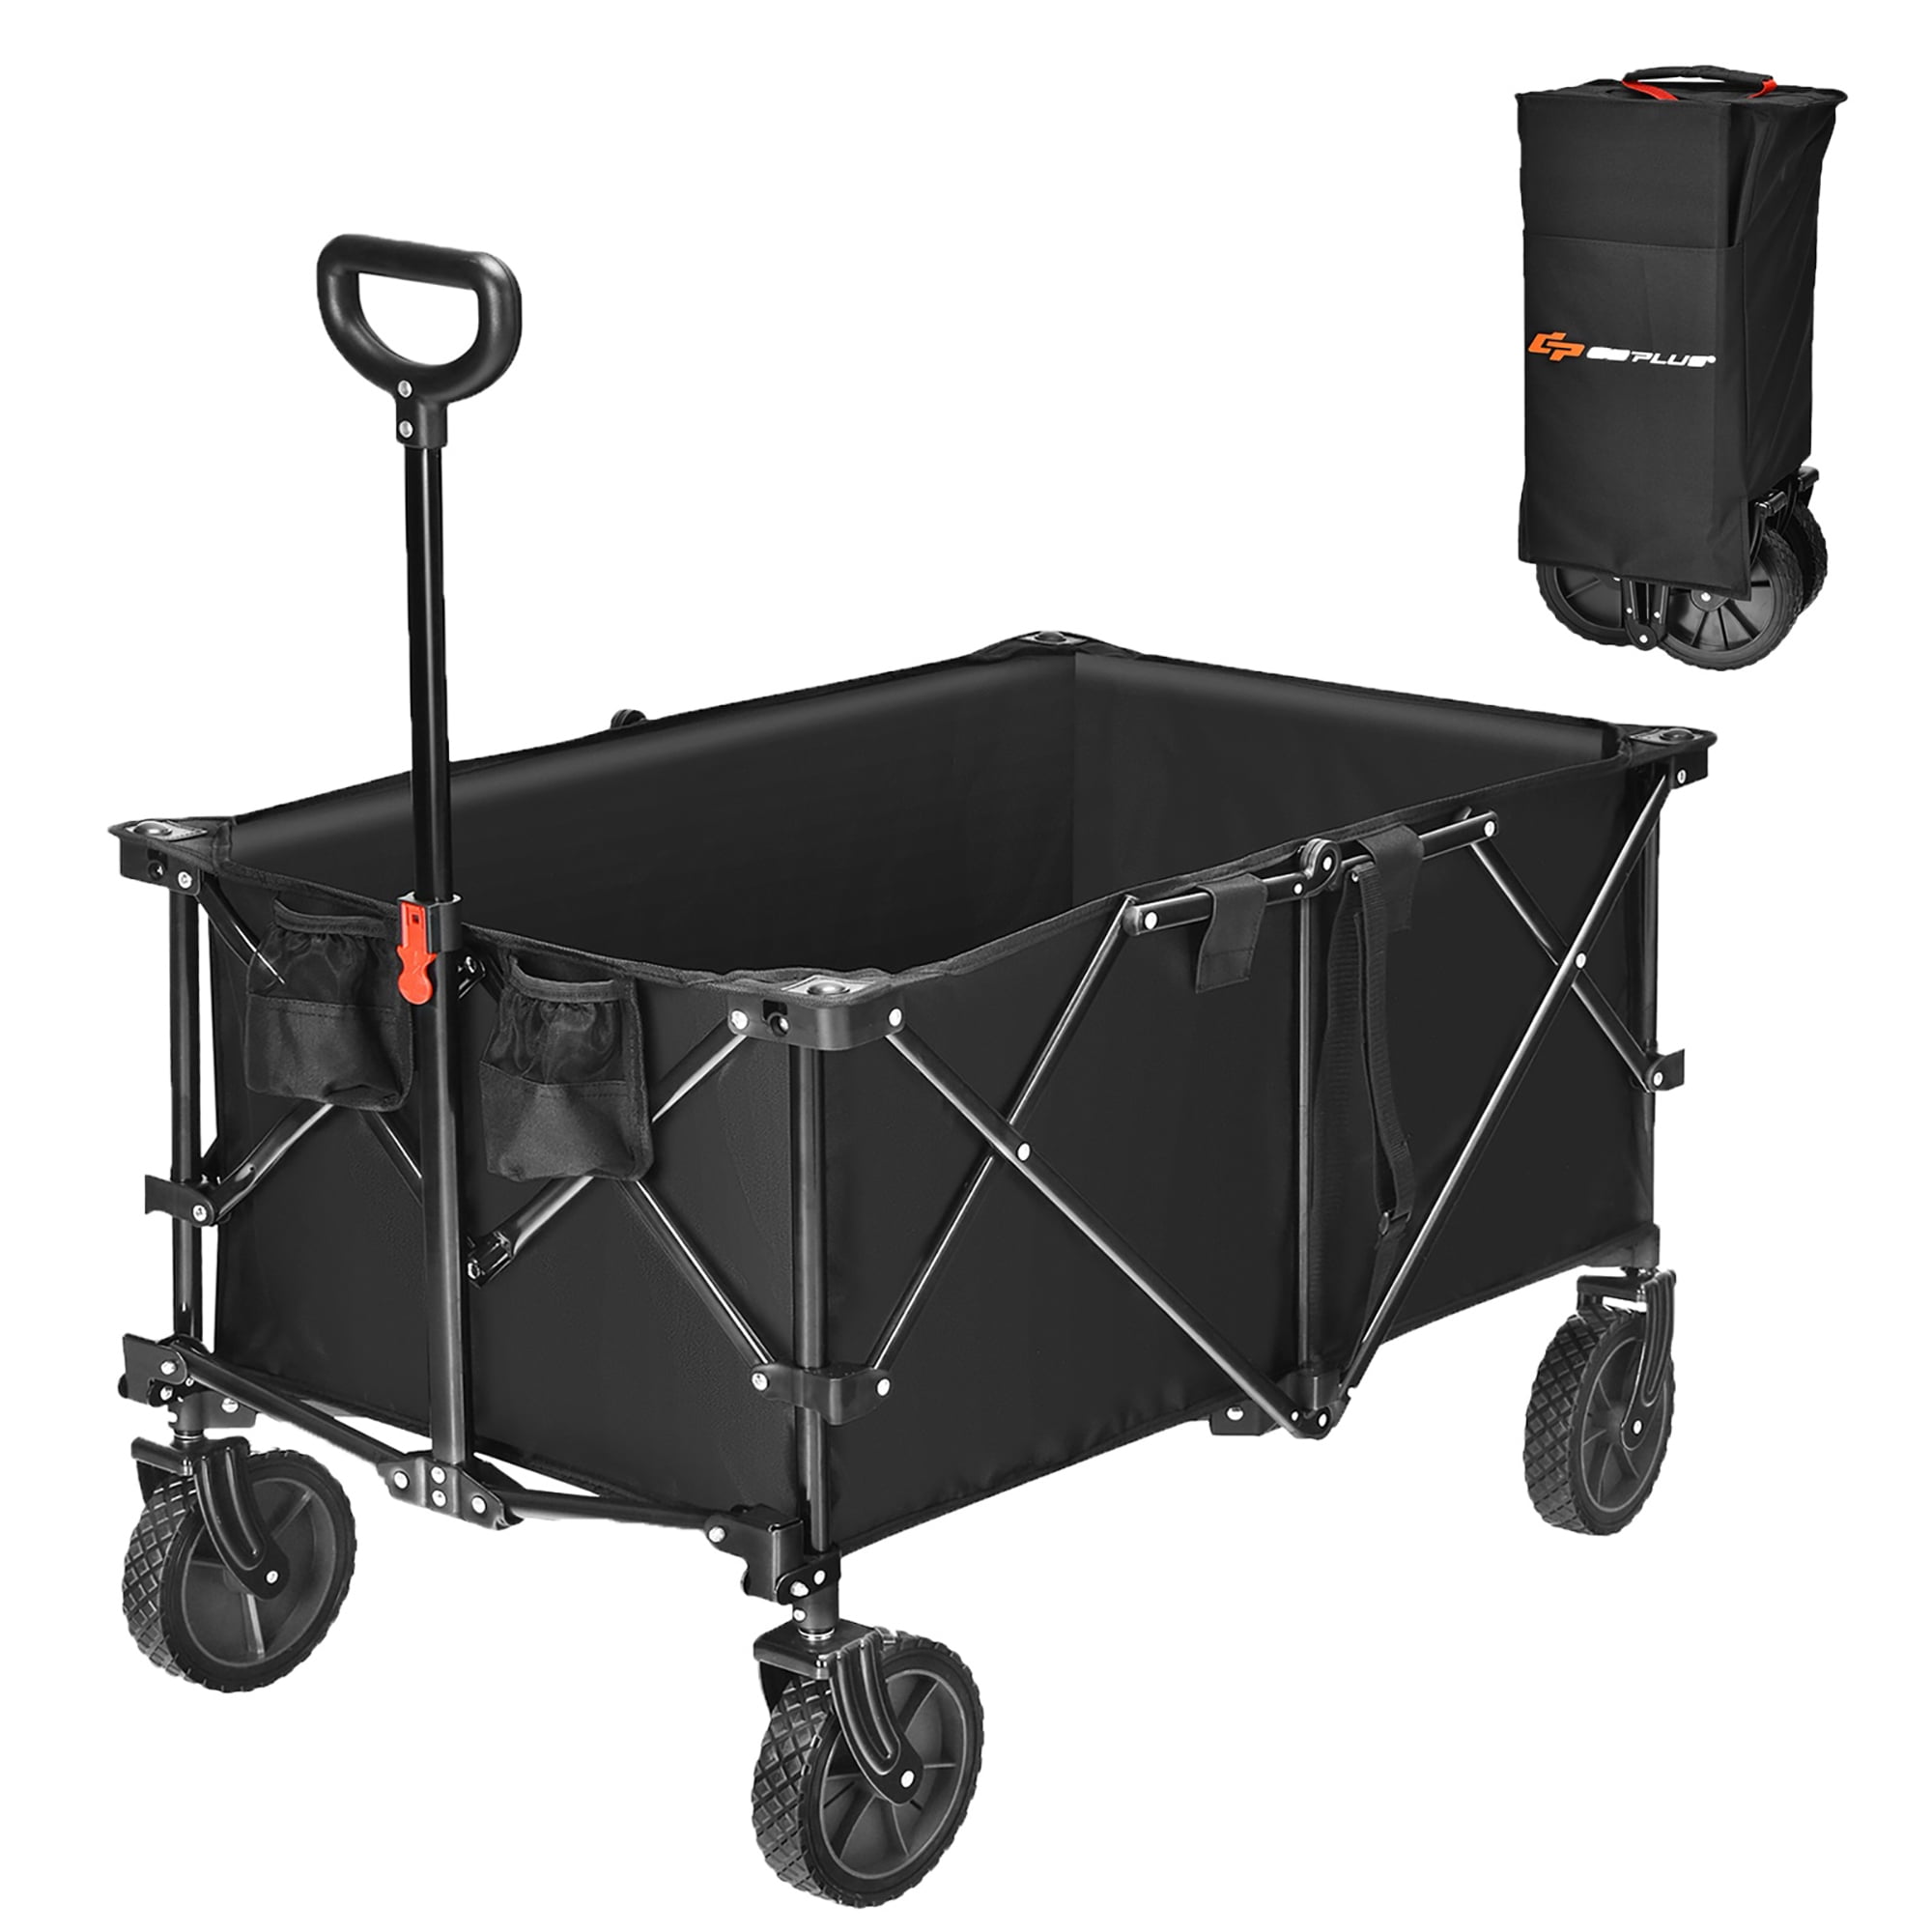 Mac Sports WTC-169 Collapsible Outdoor Utility Wagon with Folding 